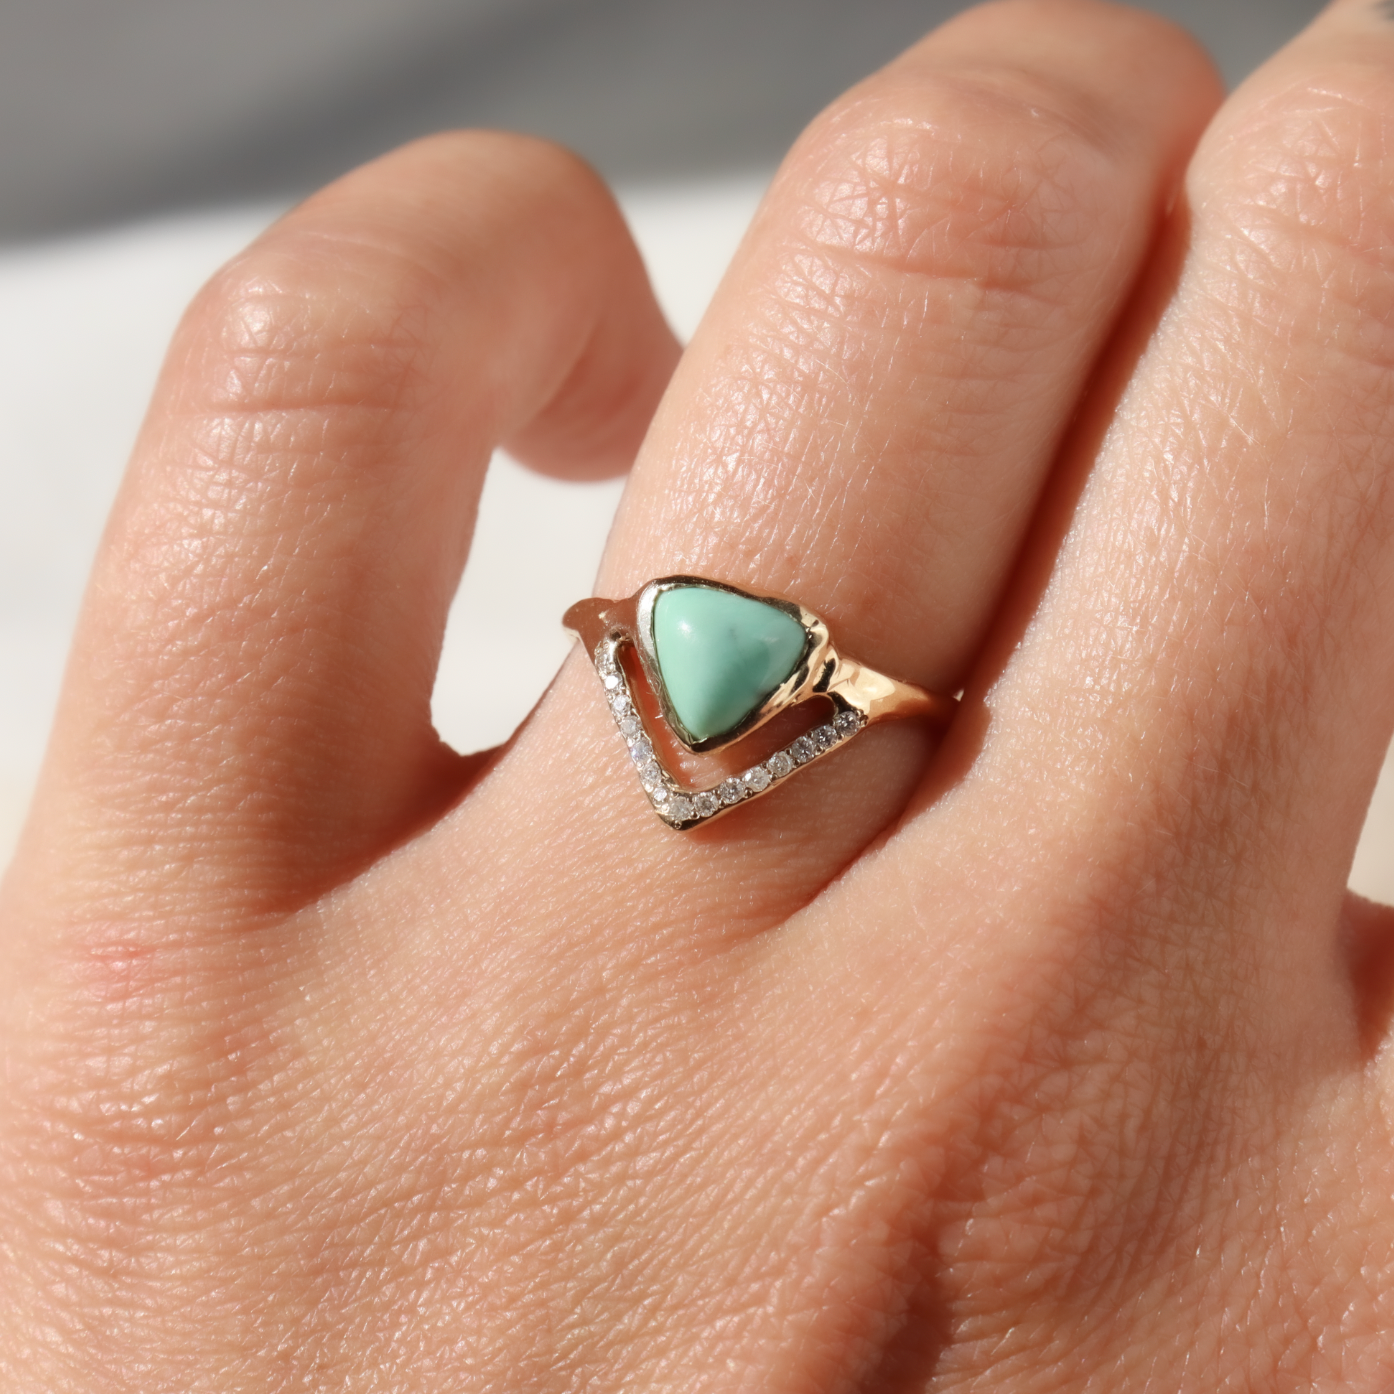 trillion variscite ring is worn on a ring finger to show size